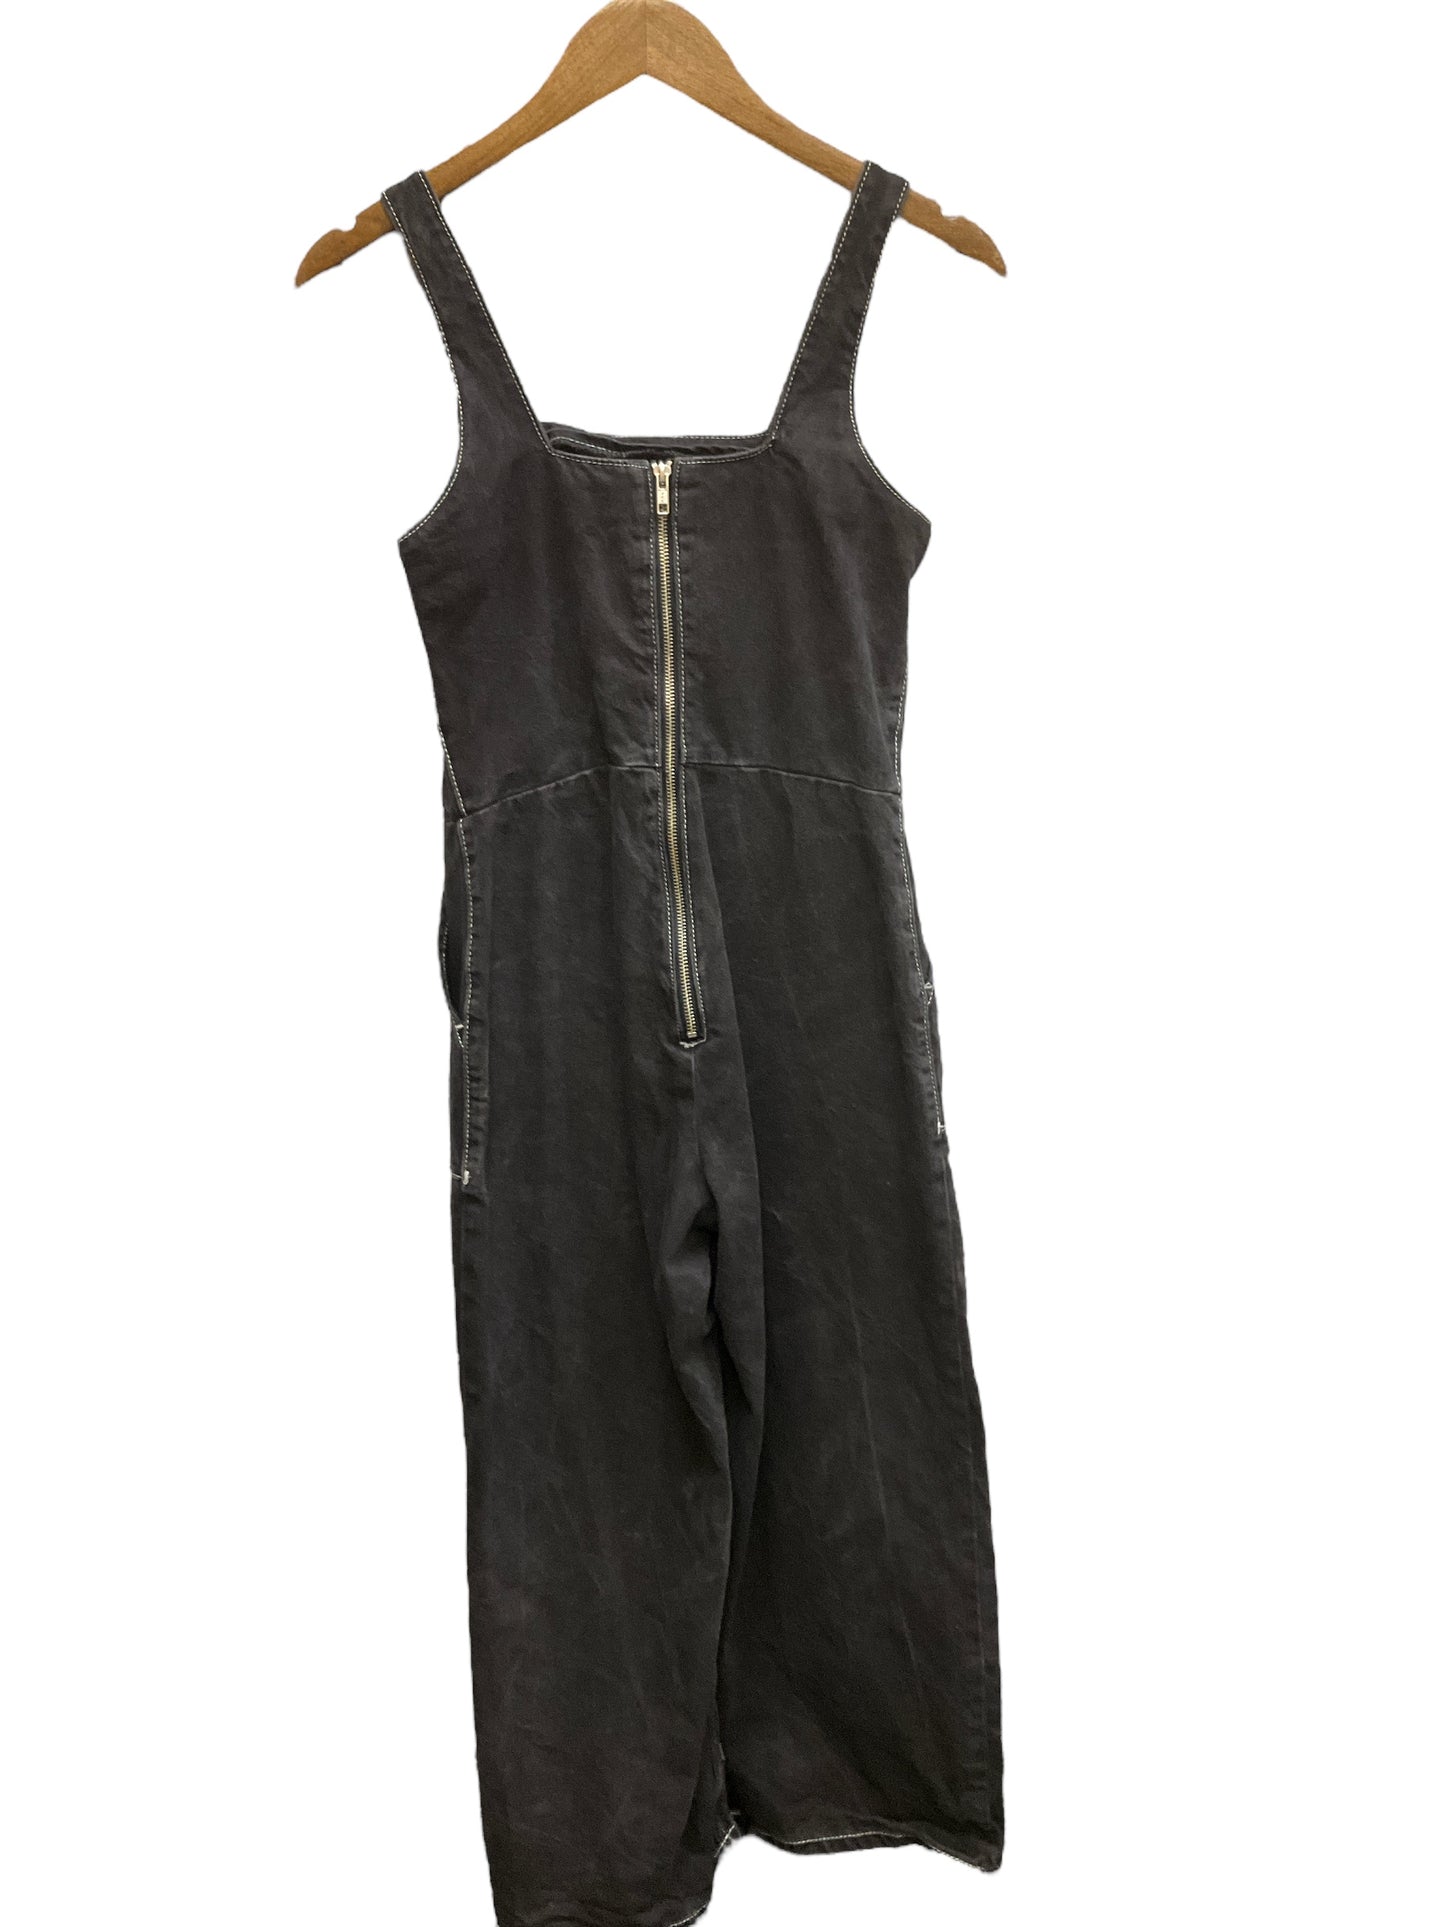 Overalls By Top Shop  Size: 2